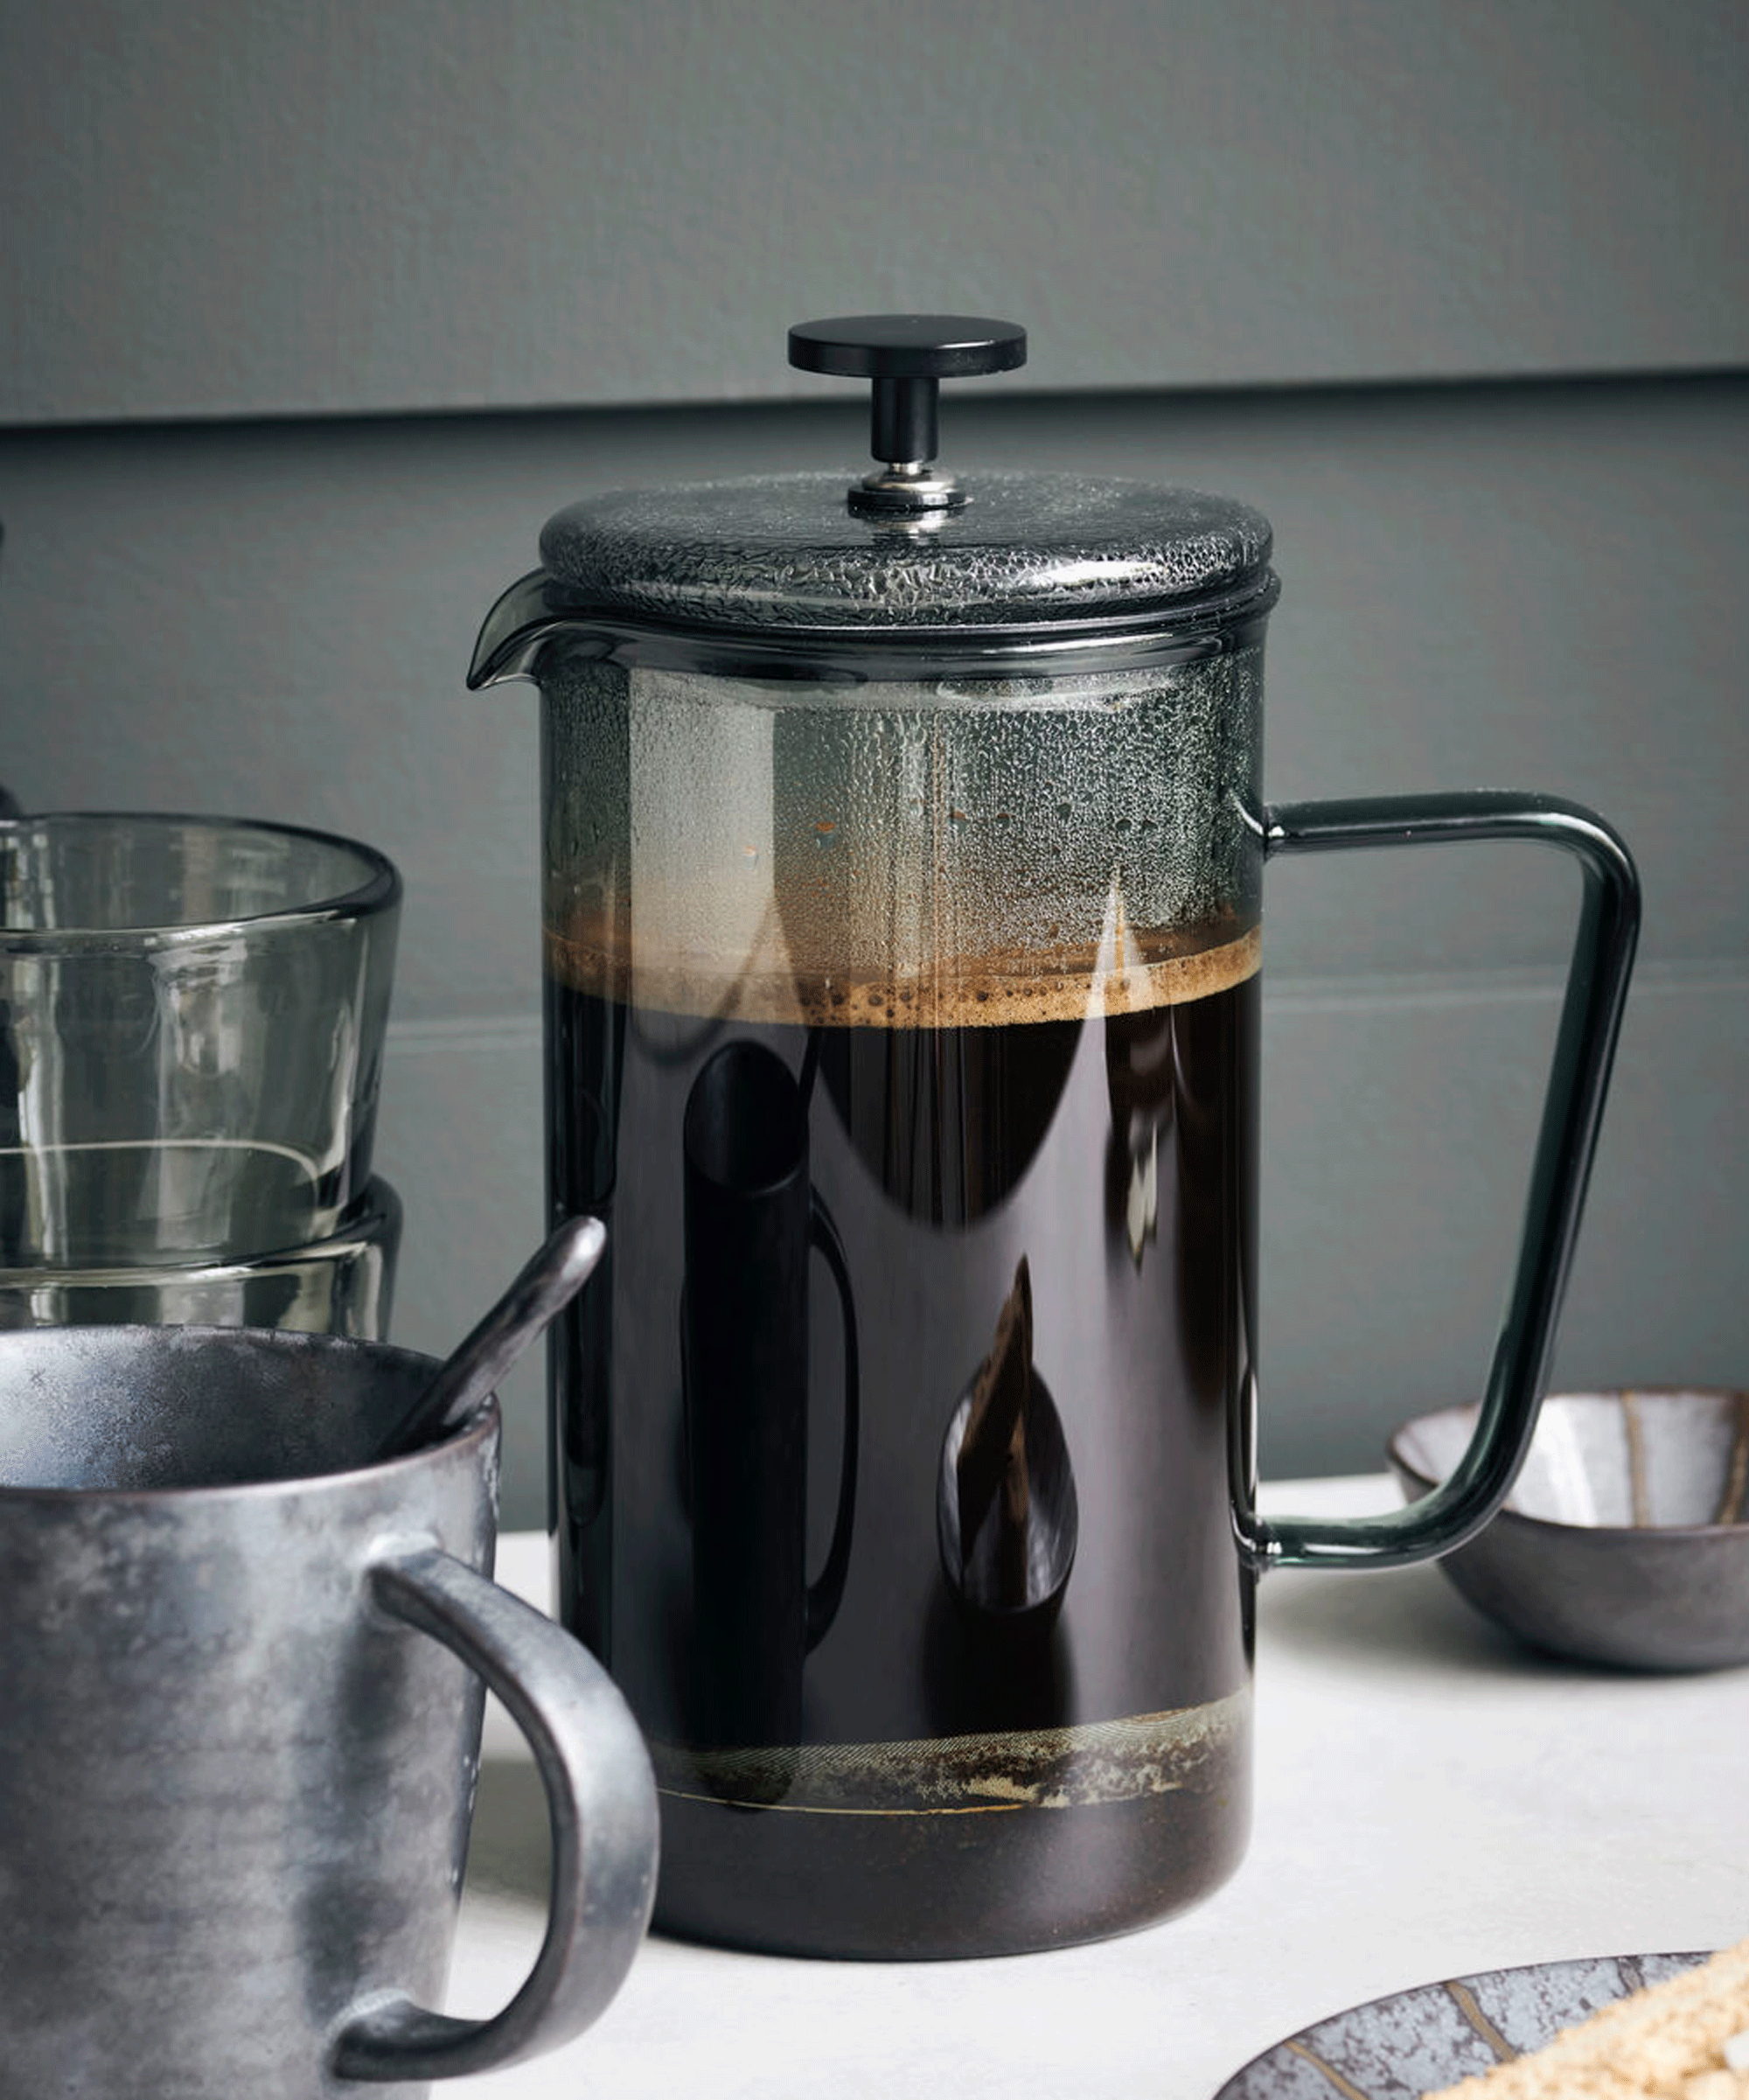 cafetiere filled with coffee